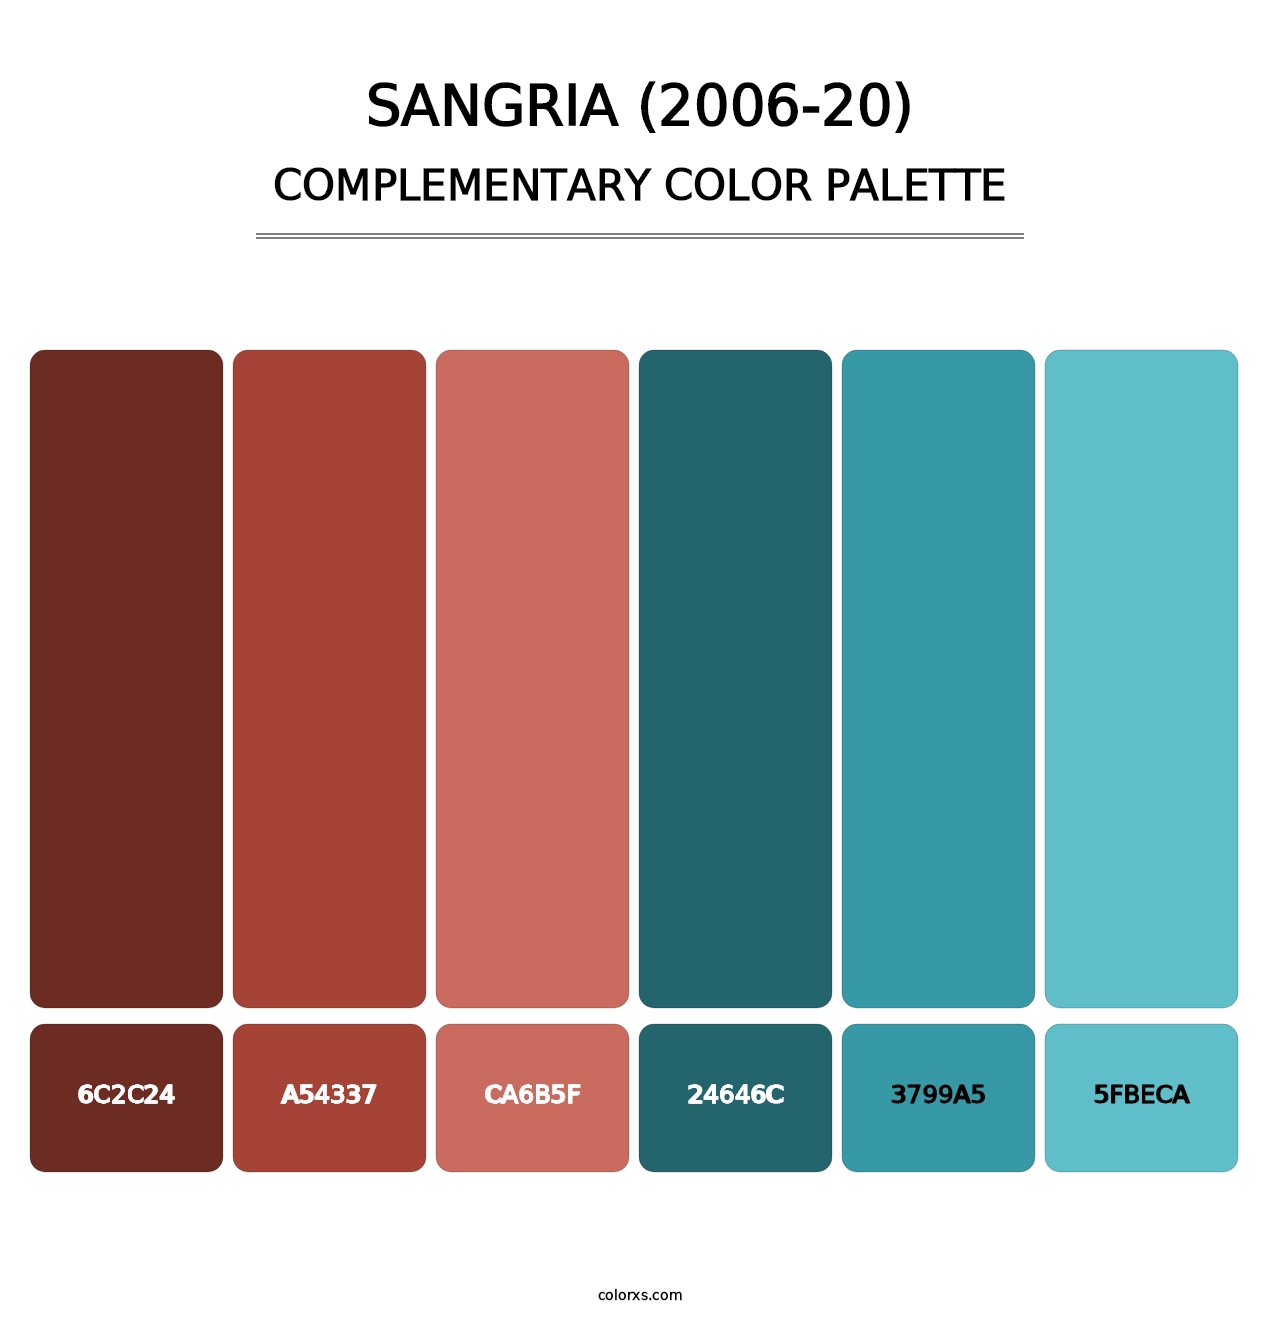 Sangria (2006-20) - Complementary Color Palette